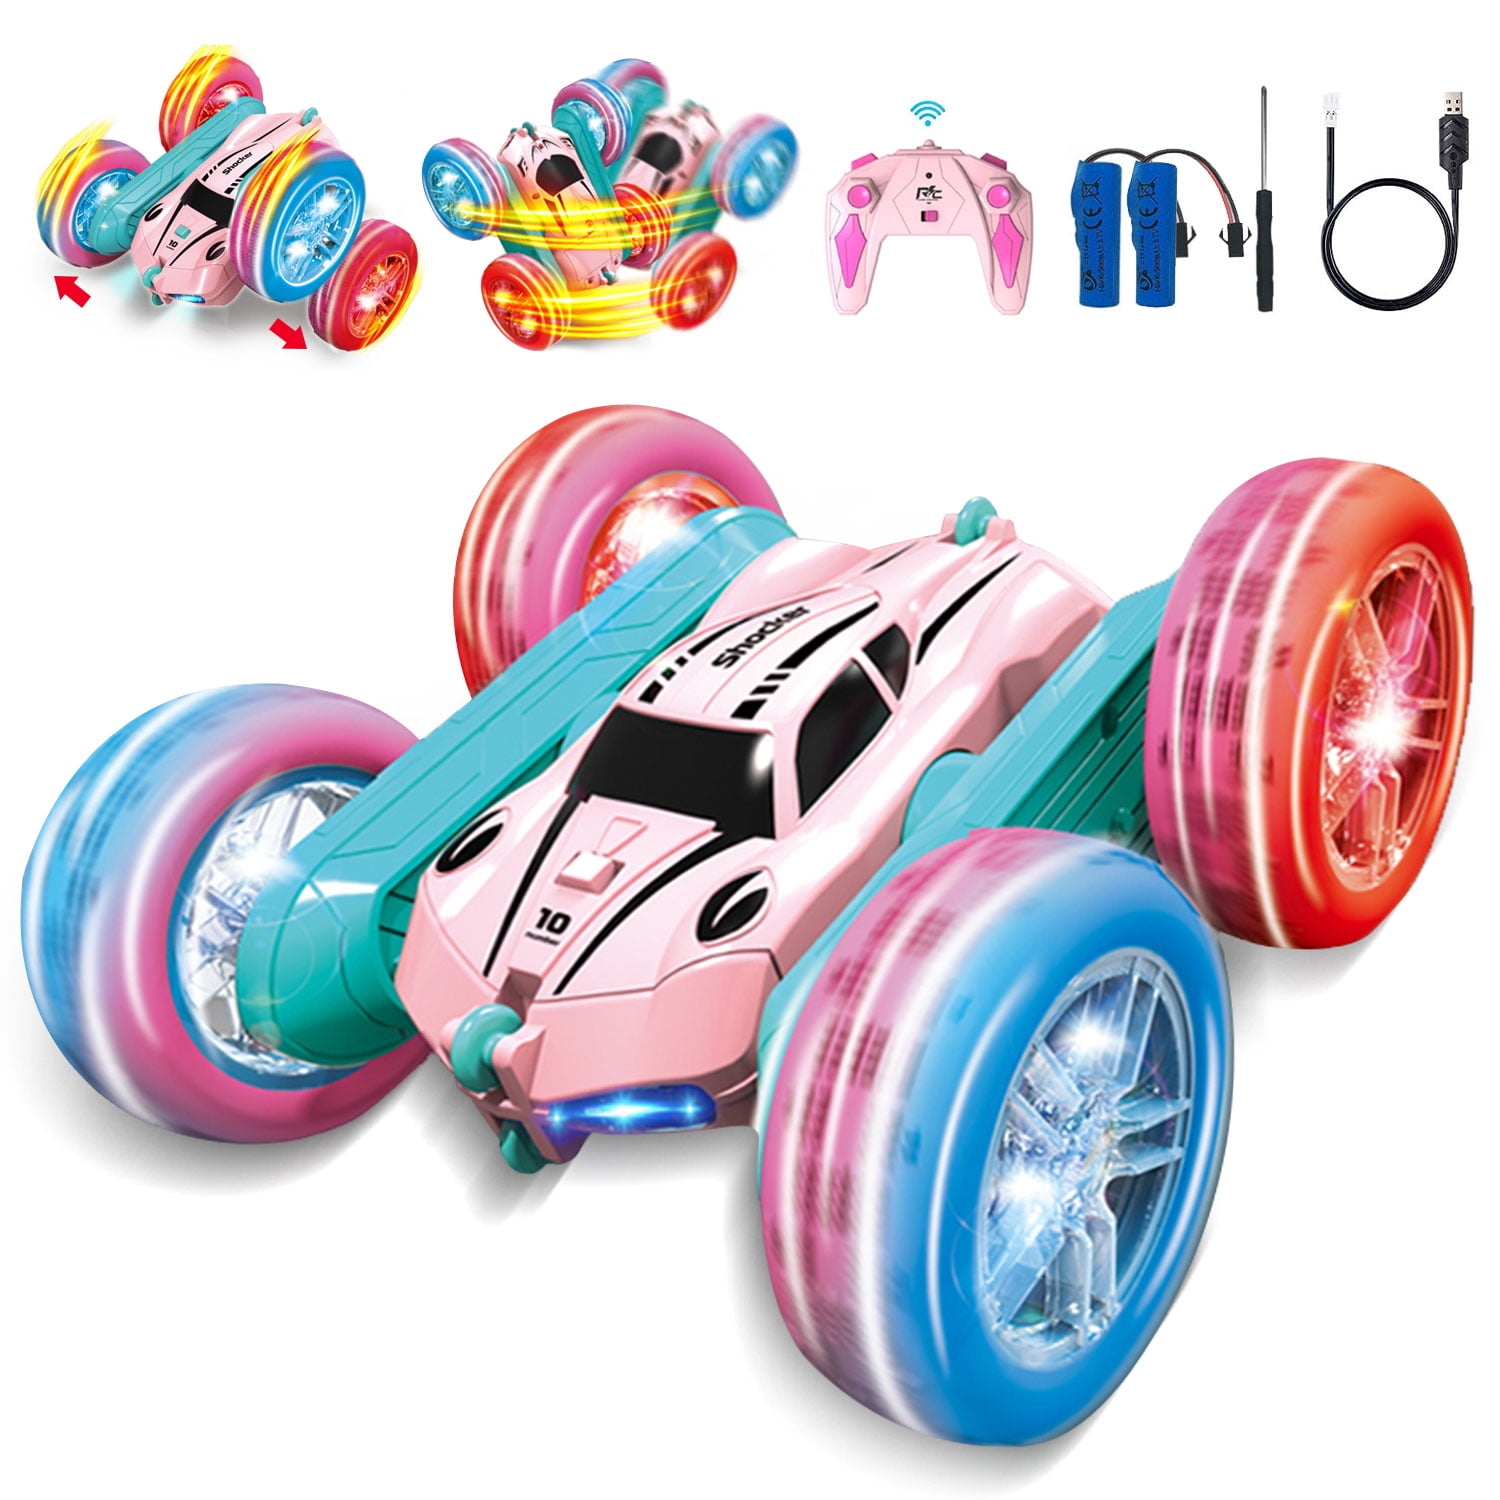 Remote Control Car Boys Gifts: Gesture Sensing RC Stunt Cars Kids Toys for  Age 6 7 8 9 10 11 12 Year Old - Best Birthday Gifts